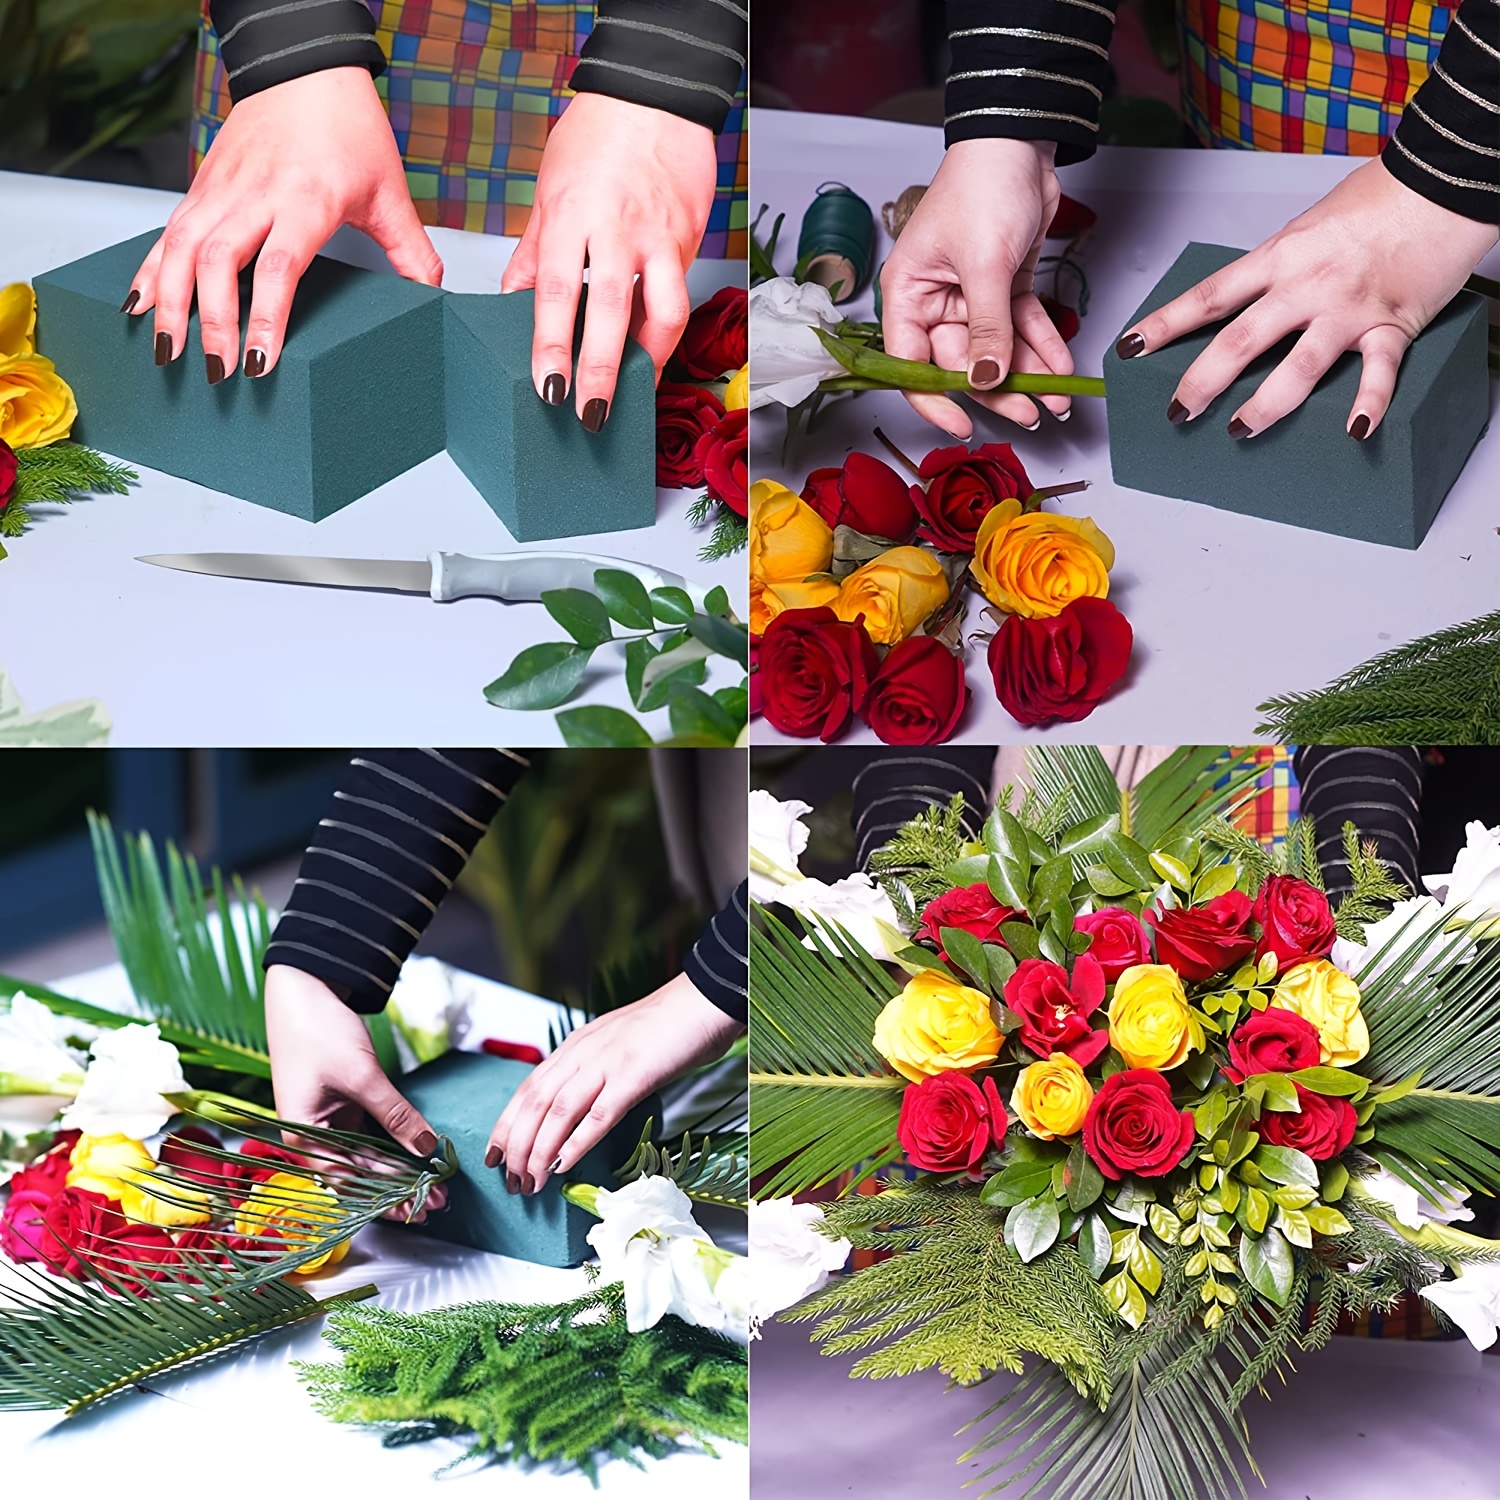 DIY Dry Floral Foam, How To Make Dry Floral Foam At home